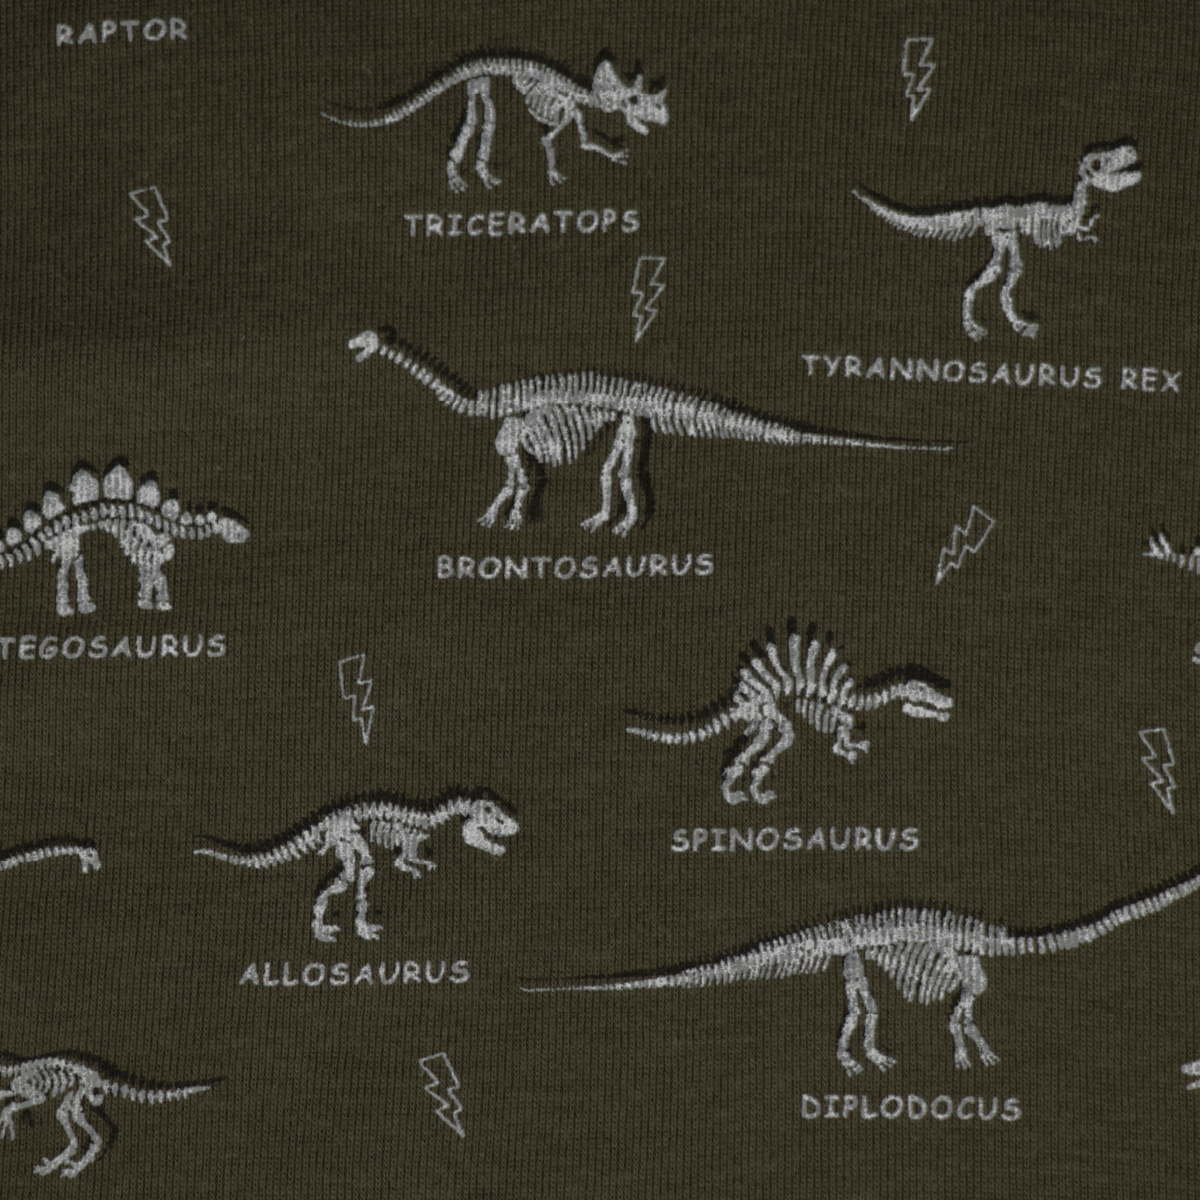 FIFFY DINO FOSSIL T-SHIRT SUIT